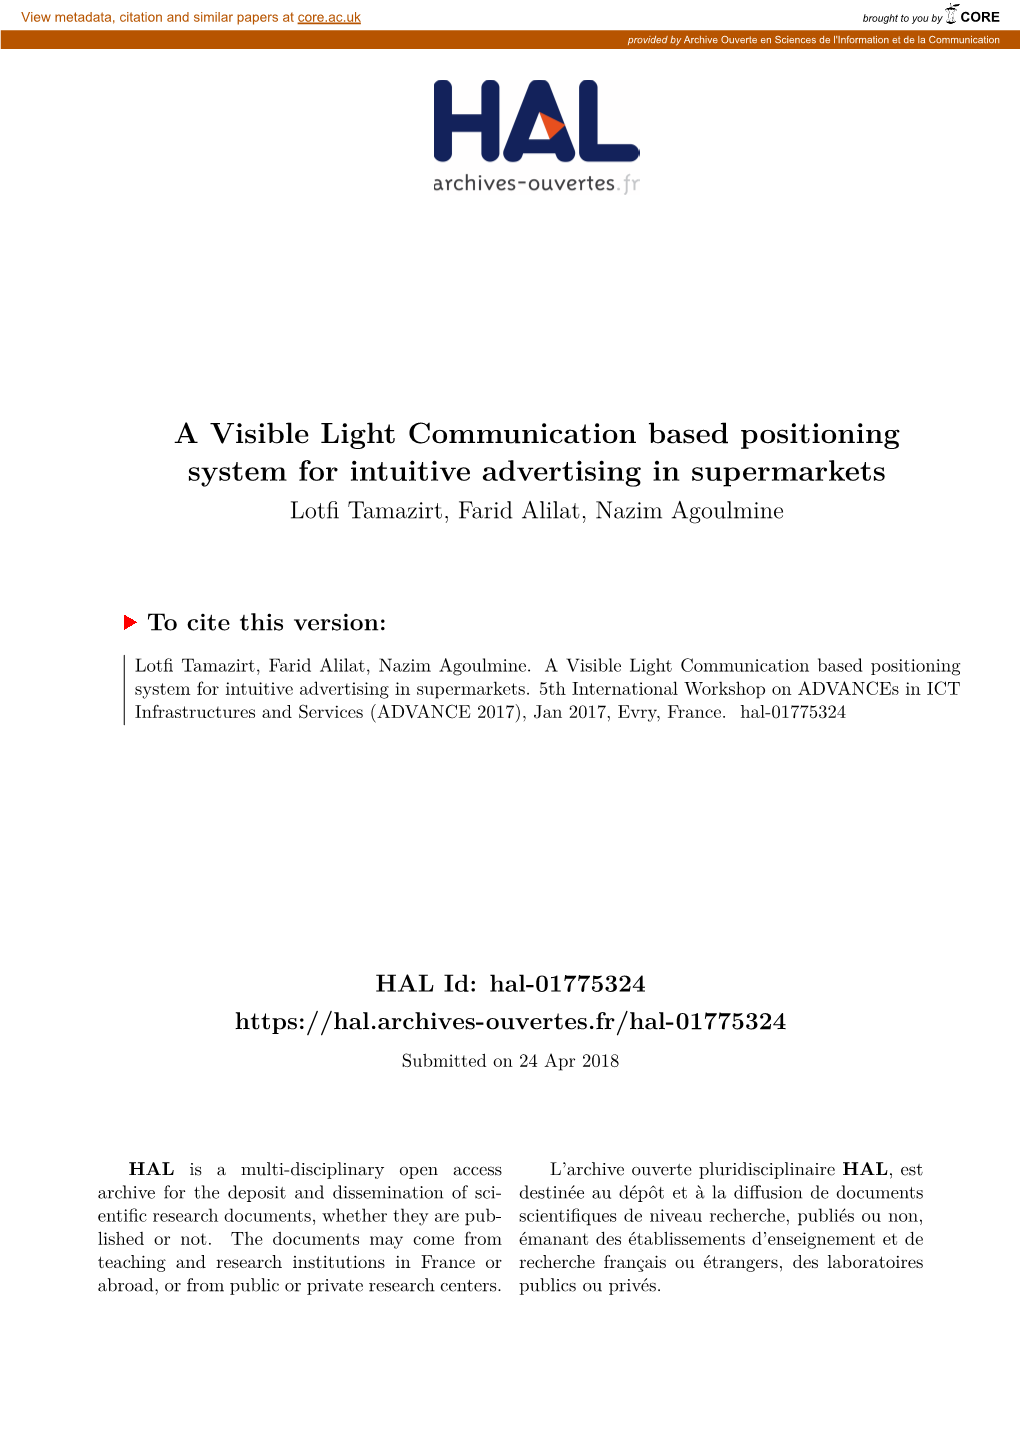 A Visible Light Communication Based Positioning System for Intuitive Advertising in Supermarkets Lotfi Tamazirt, Farid Alilat, Nazim Agoulmine